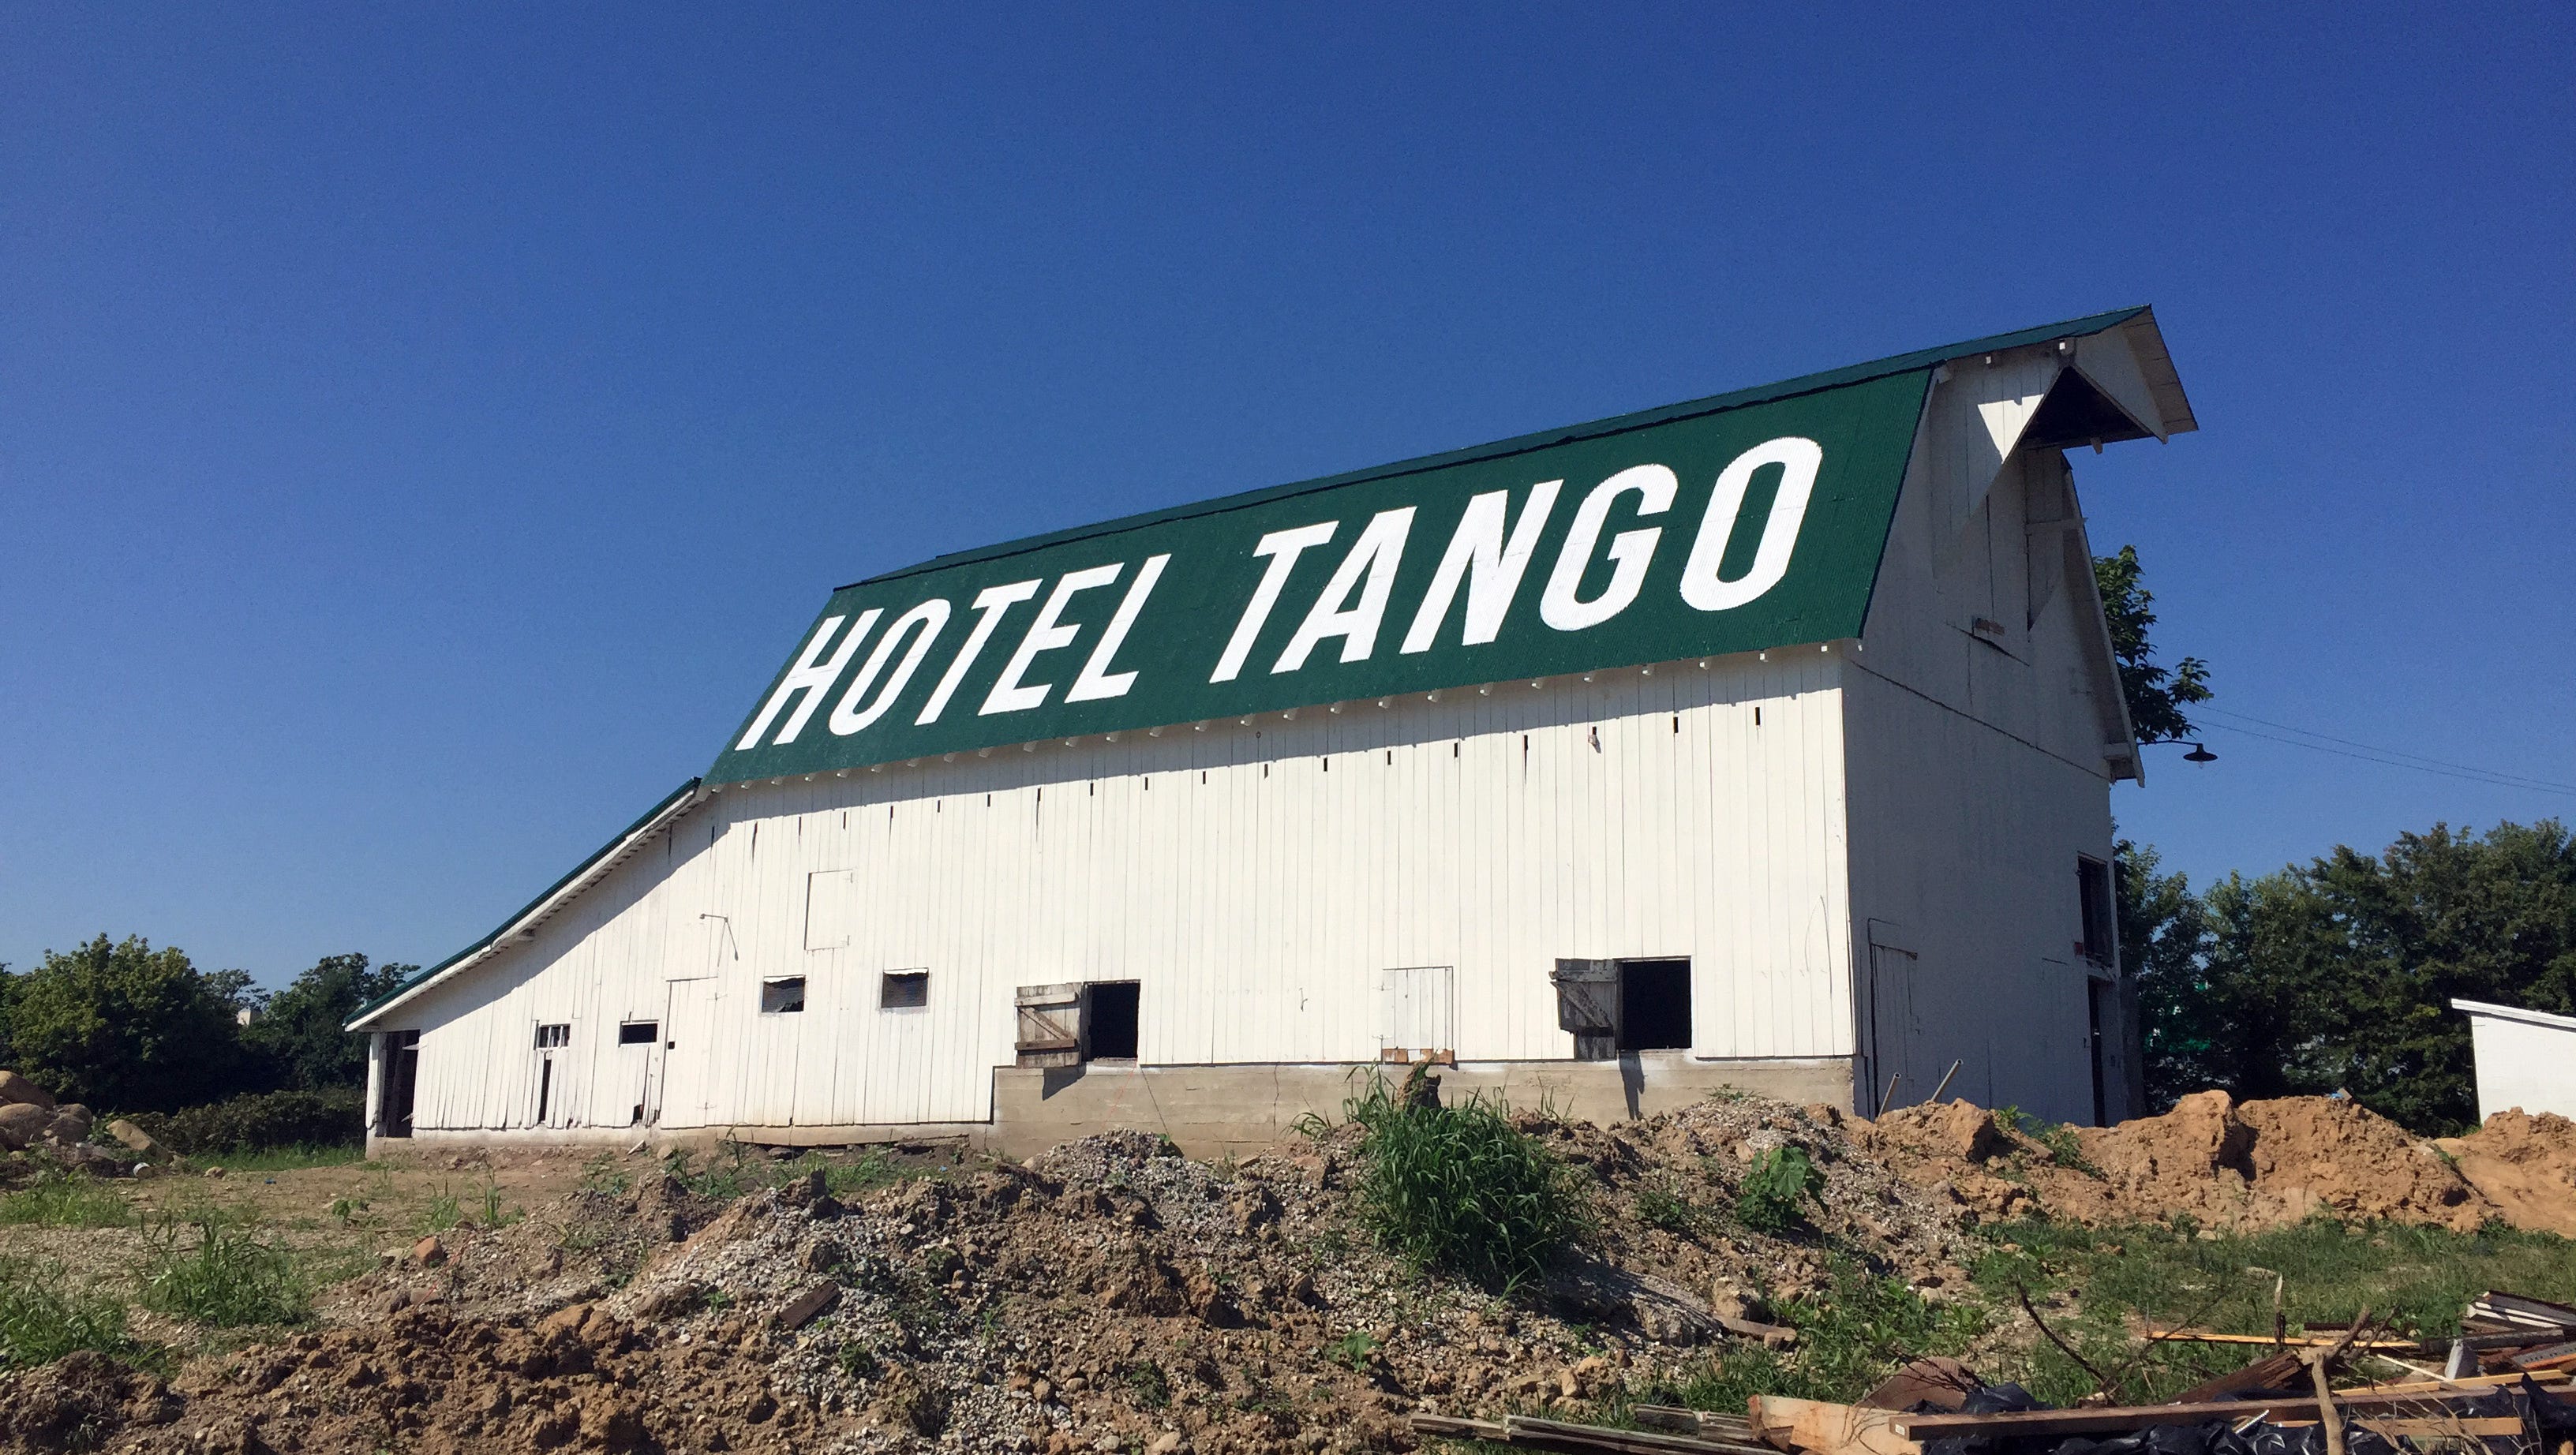 What S Up With The Hotel Tango Barn Off I 65